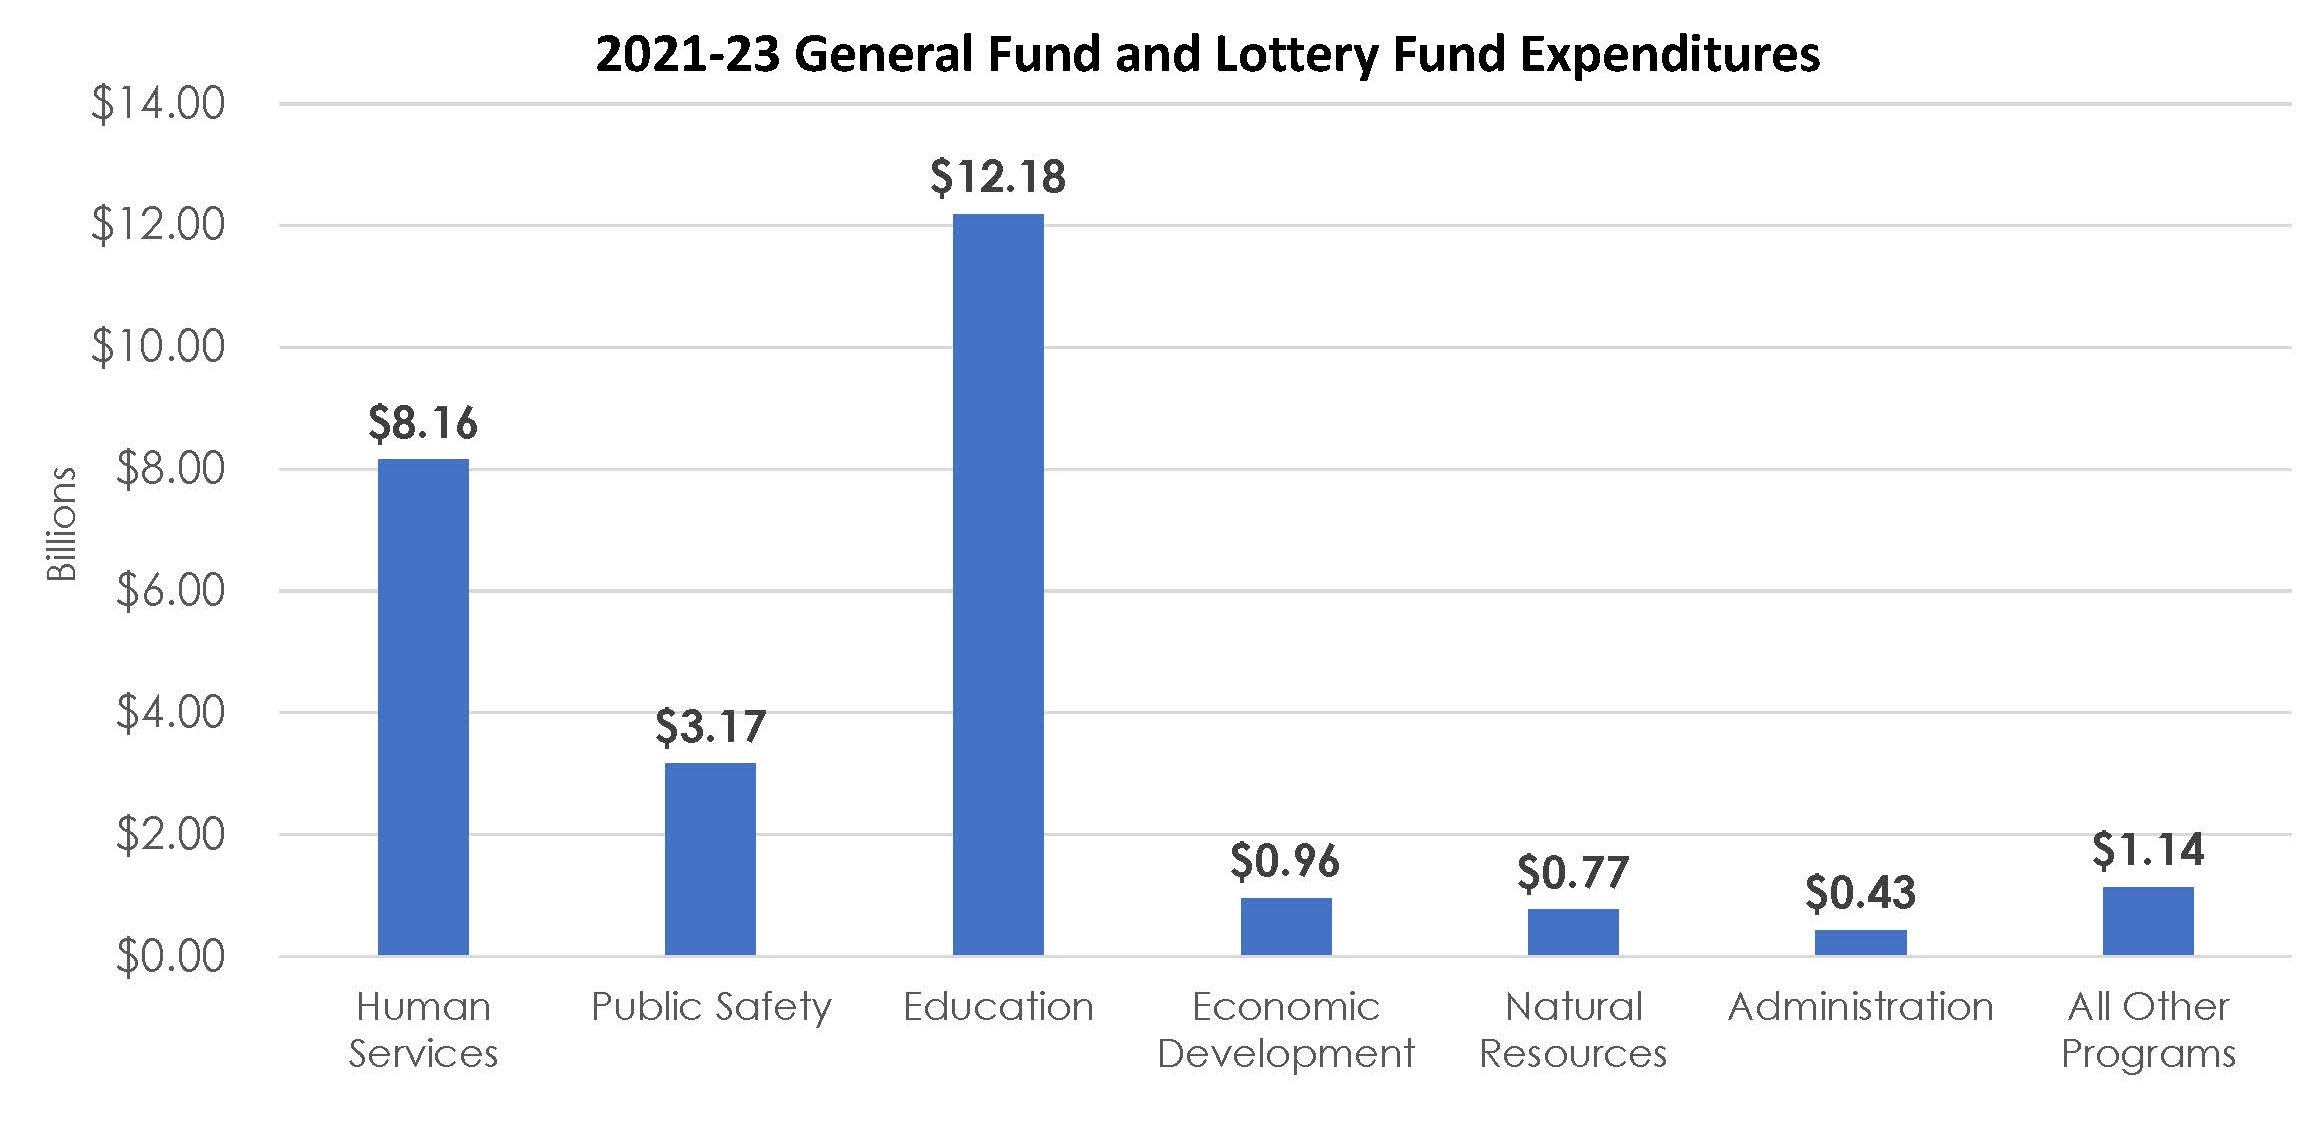 graph showing general and lottery fund expenditures in dollars